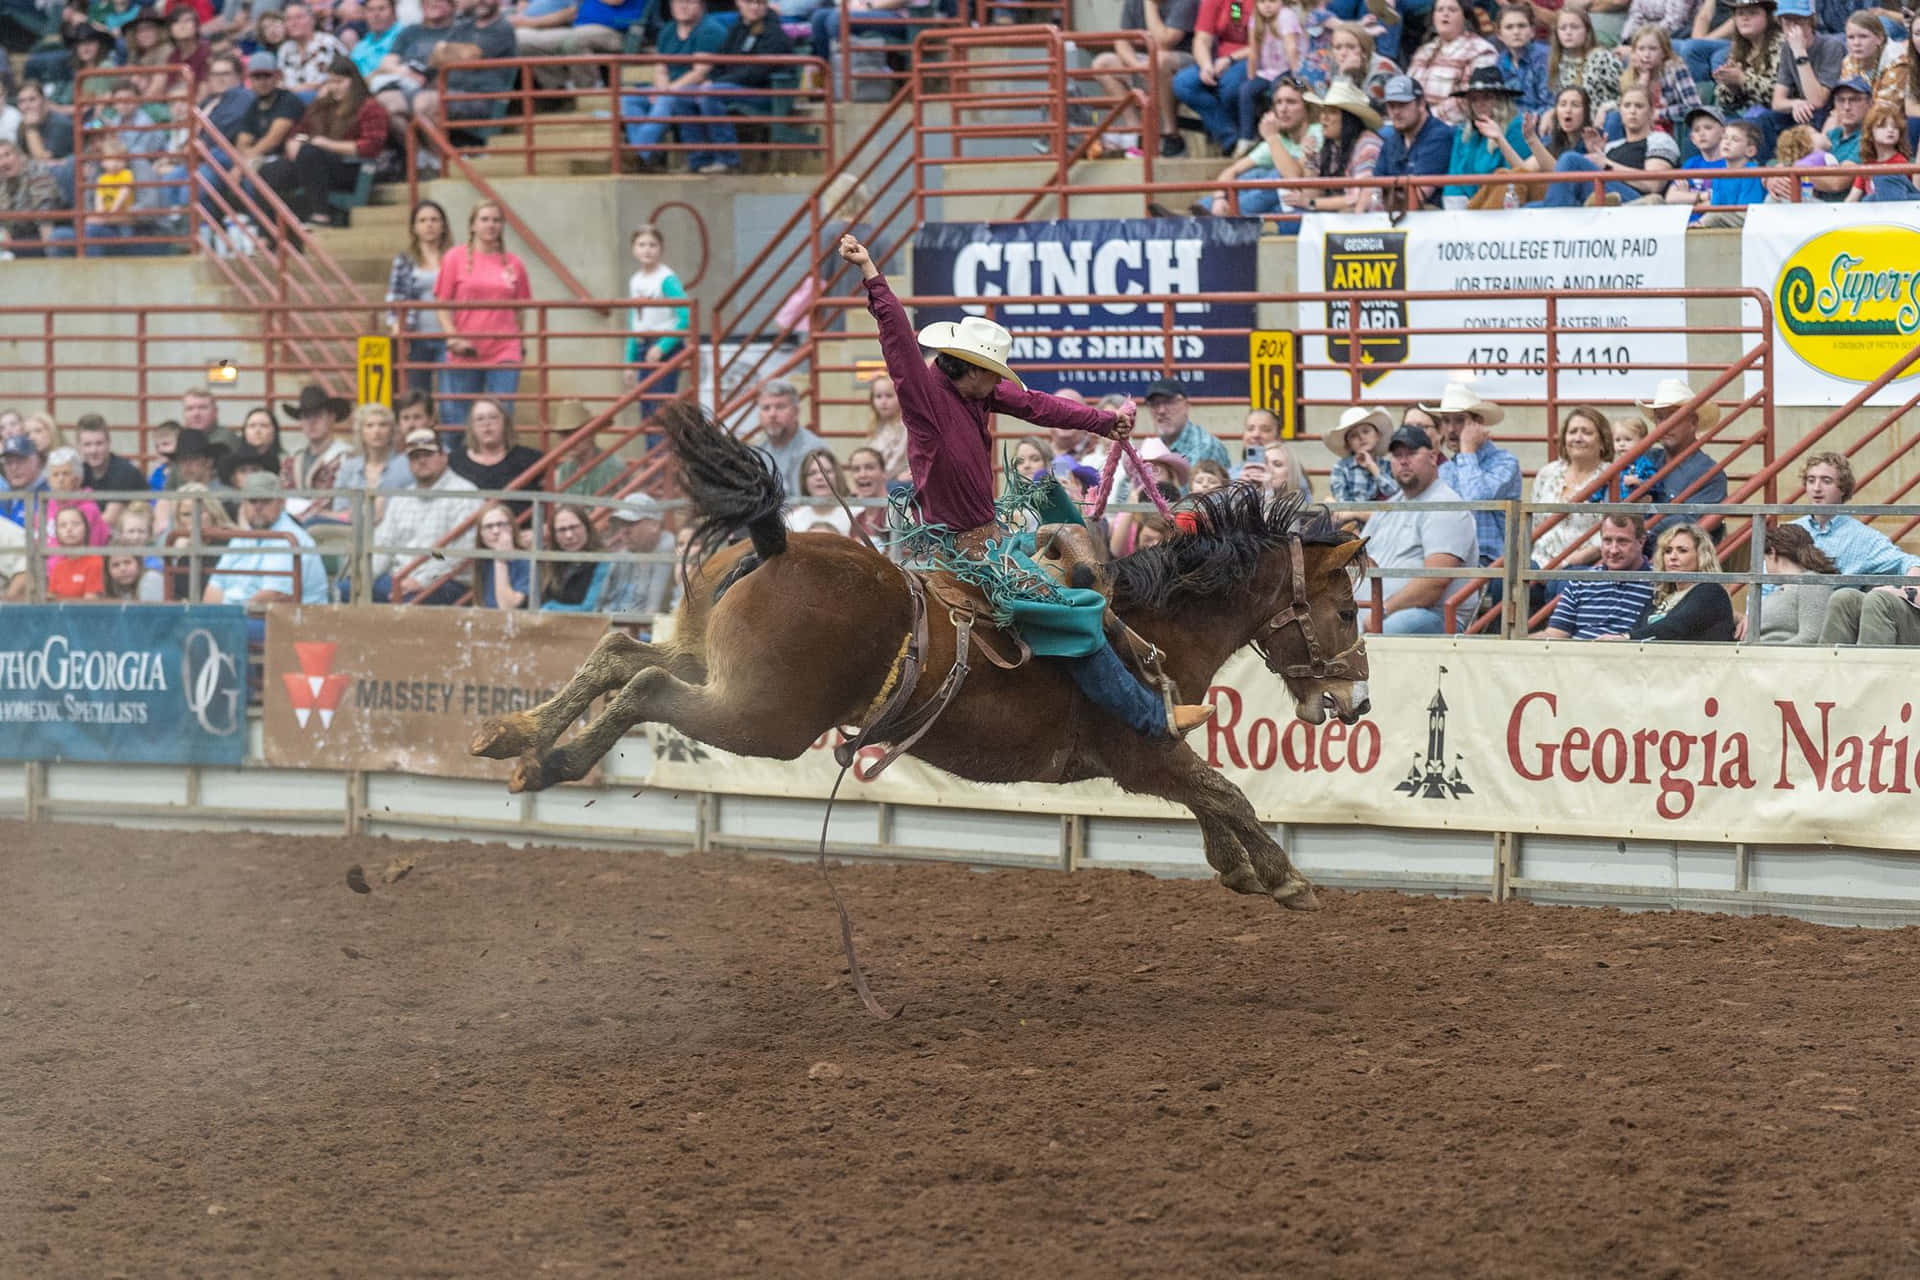 Cowboys and Cowboys race at Longhorn Rodeo